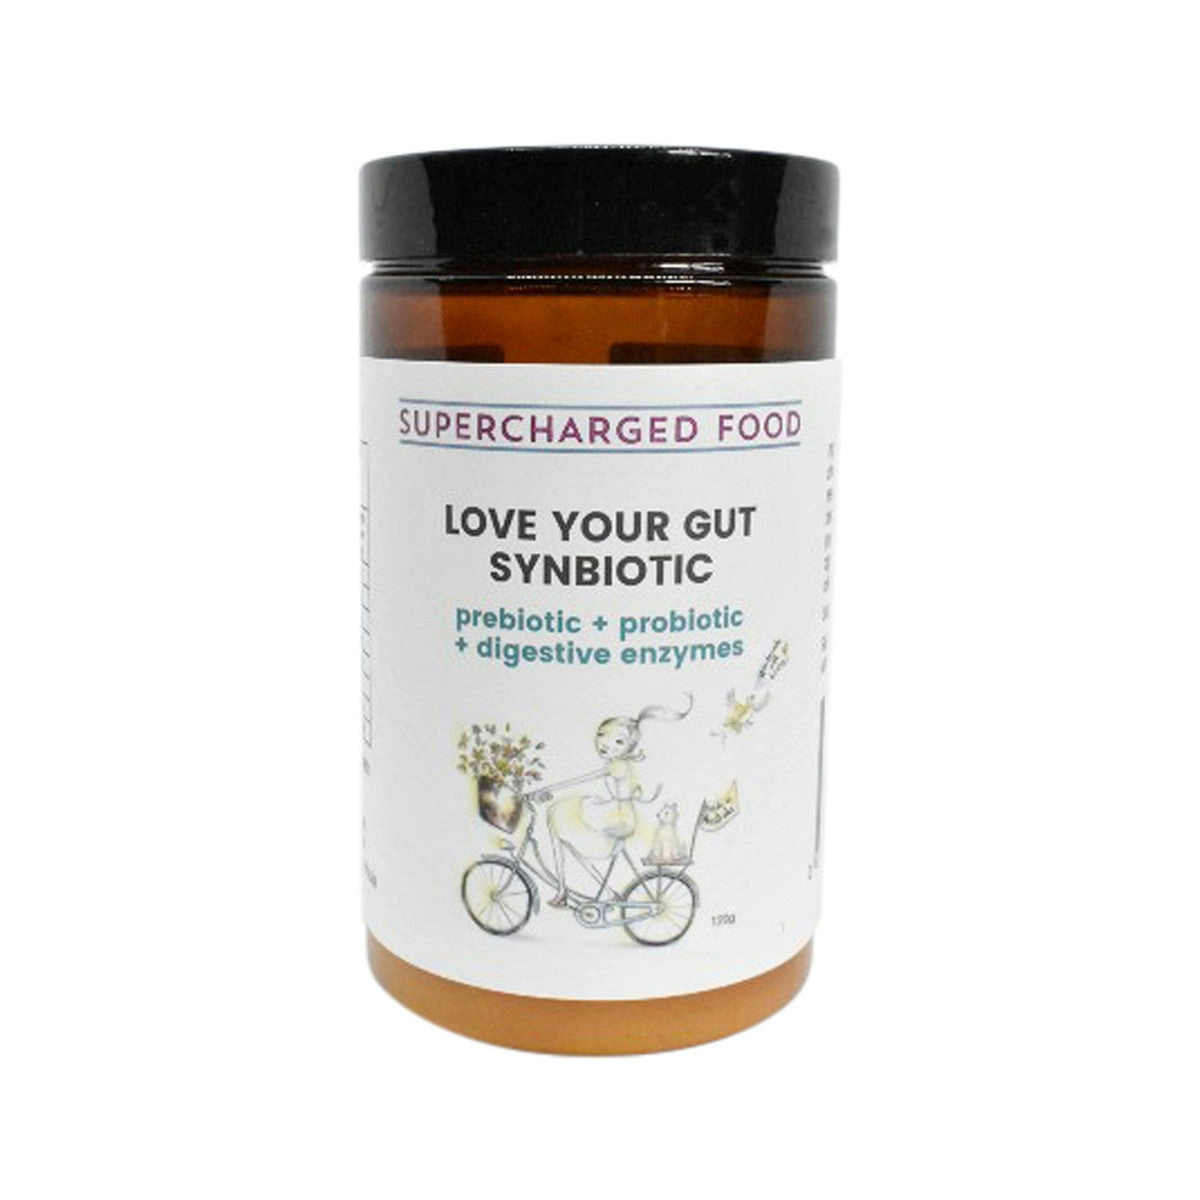 image of Supercharged Food Love Your Gut Synbiotic 120g on white background